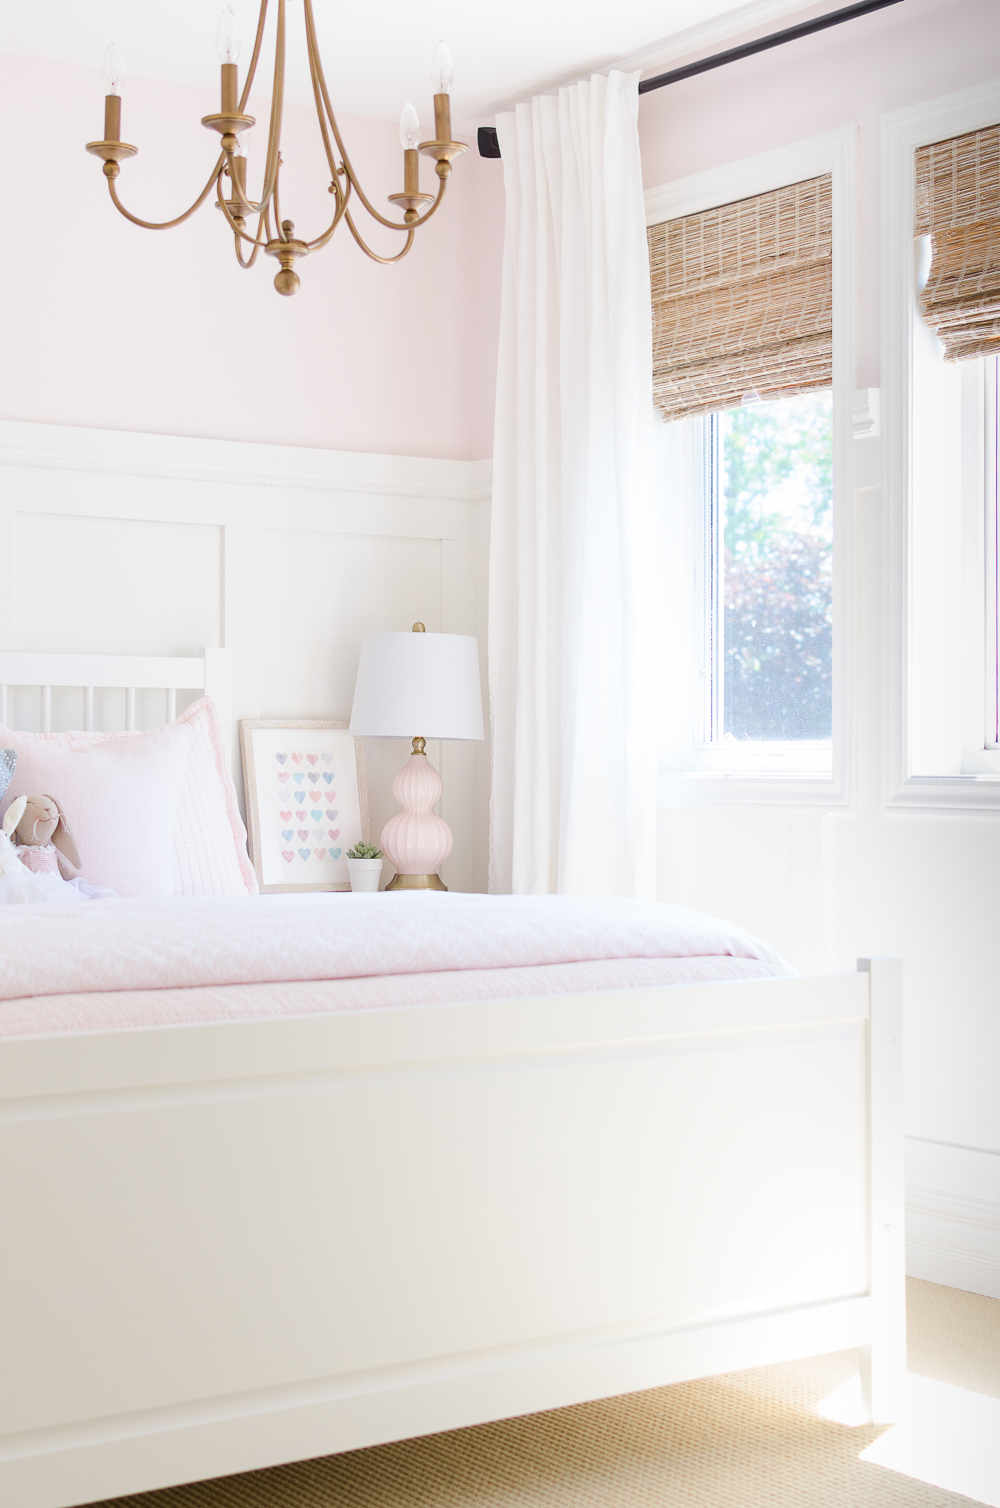 The 9 Best Pink Paint Colors For Your Home